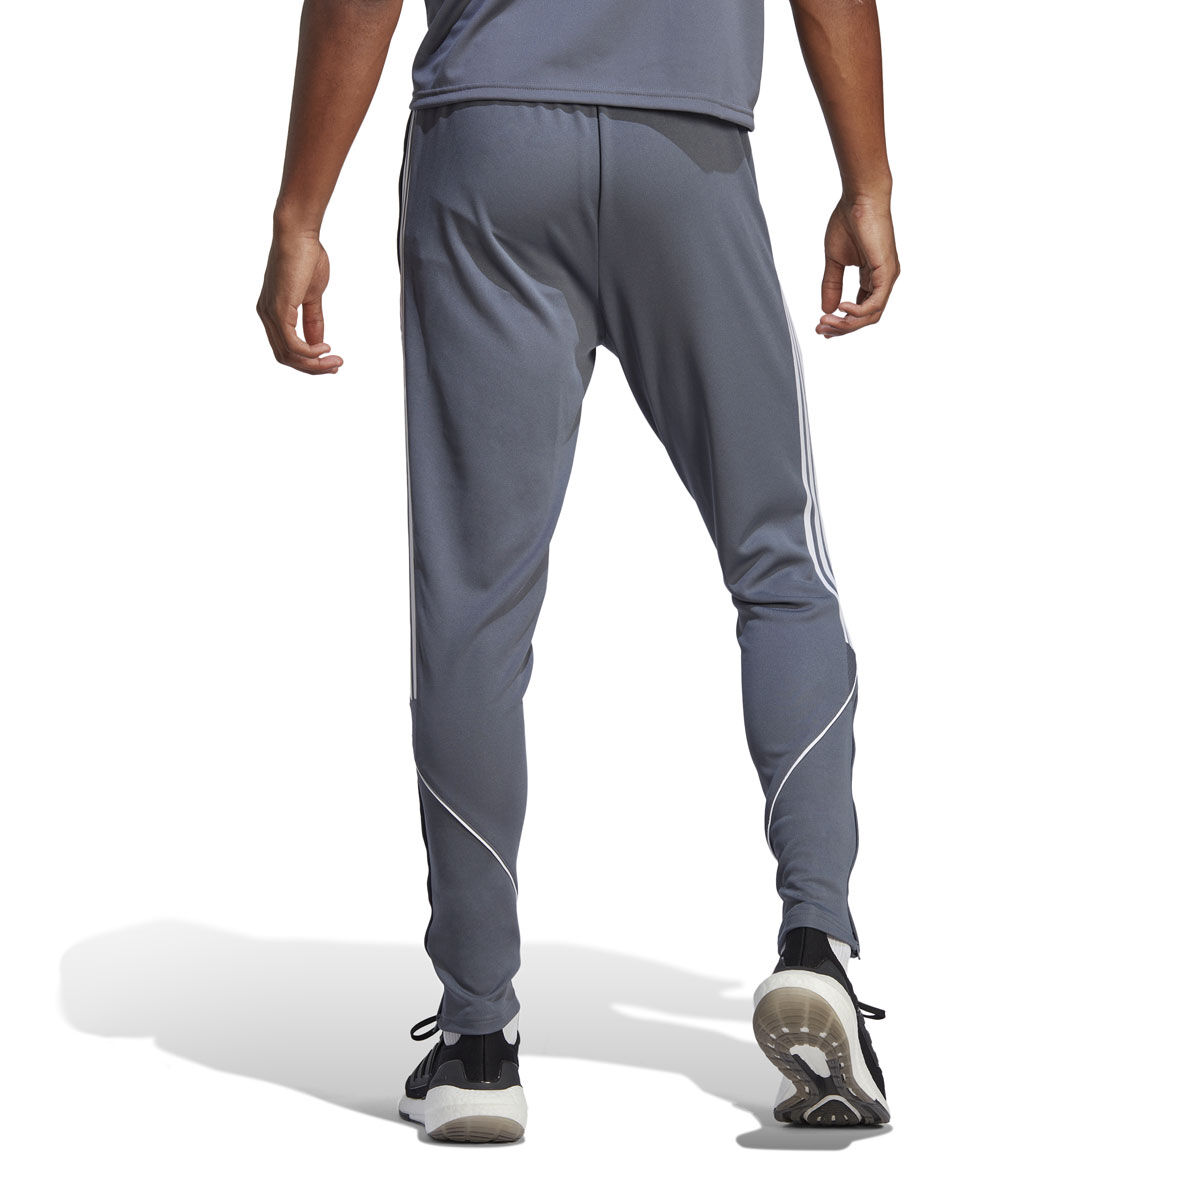 Men's Activewear: Bamboo Viscose Fitness Apparel for Men | Boody Eco